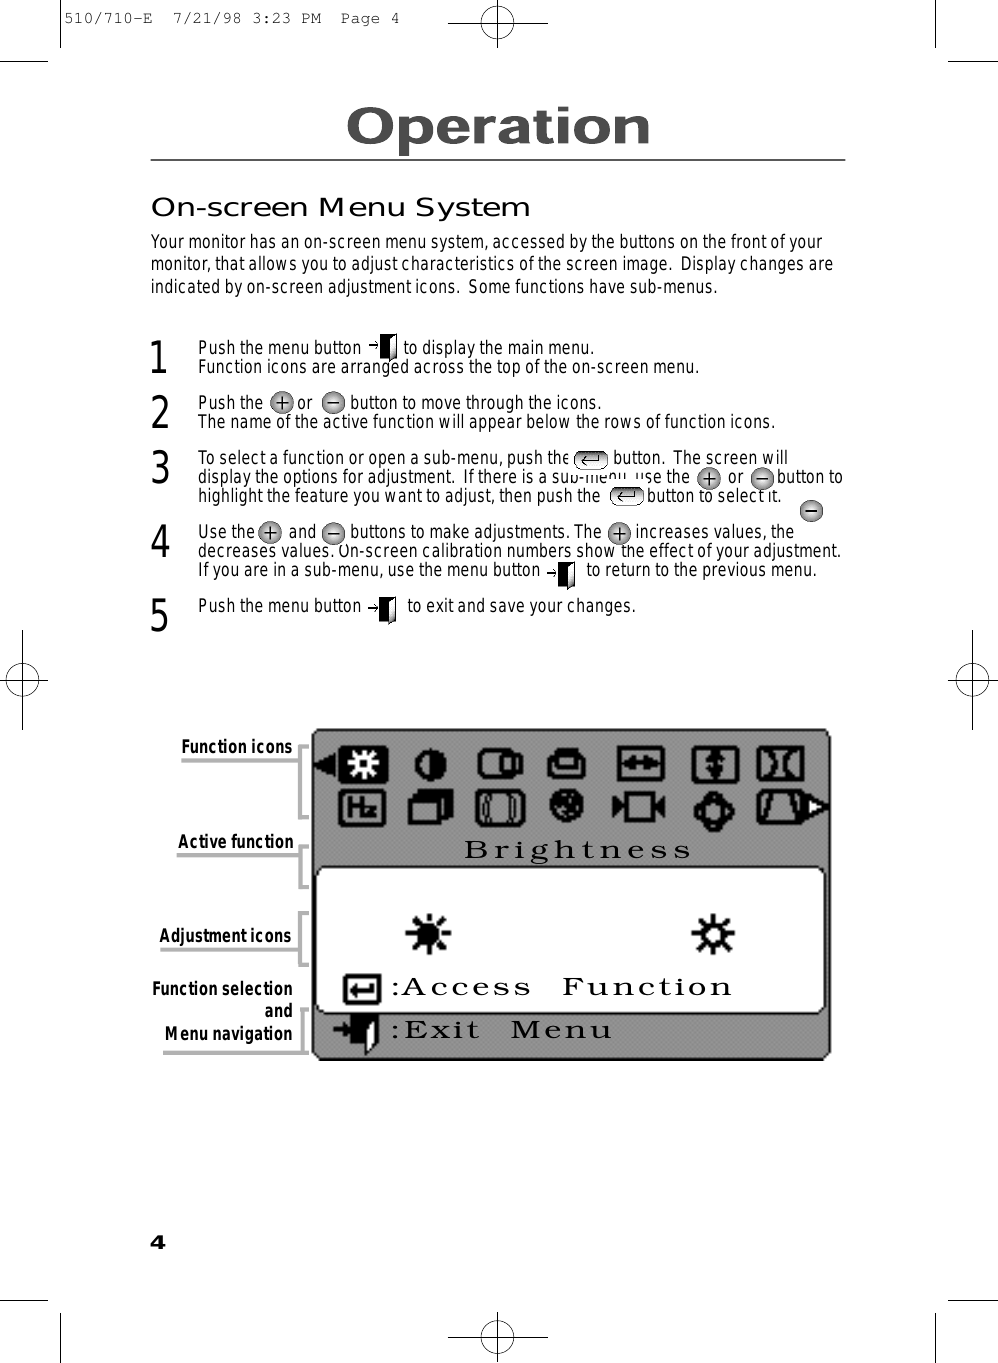 On-screen Menu SystemYour monitor has an on-screen menu system, accessed by the buttons on the front of yourmonitor, that allows you to adjust characteristics of the screen image.  Display changes areindicated by on-screen adjustment icons.  Some functions have sub-menus.  1  Push the menu button          to display the main menu. Function icons are arranged across the top of the on-screen menu.2  Push the        or         button to move through the icons. The name of the active function will appear below the rows of function icons.  3  To select a function or open a sub-menu, push the          button.  The screen will display the options for adjustment.  If there is a sub-menu, use the         or        button tohighlight the feature you want to adjust, then push the           button to select it. 4  Use the        and        buttons to make adjustments. The        increases values, thedecreases values. On-screen calibration numbers show the effect of your adjustment.If you are in a sub-menu, use the menu button           to return to the previous menu. 5Push the menu button           to exit and save your changes. Function iconsAdjustment iconsActive function Function selection and Menu navigation4B r i g h t n e s s:Access  Function:Exit  Menu510/710-E  7/21/98 3:23 PM  Page 4